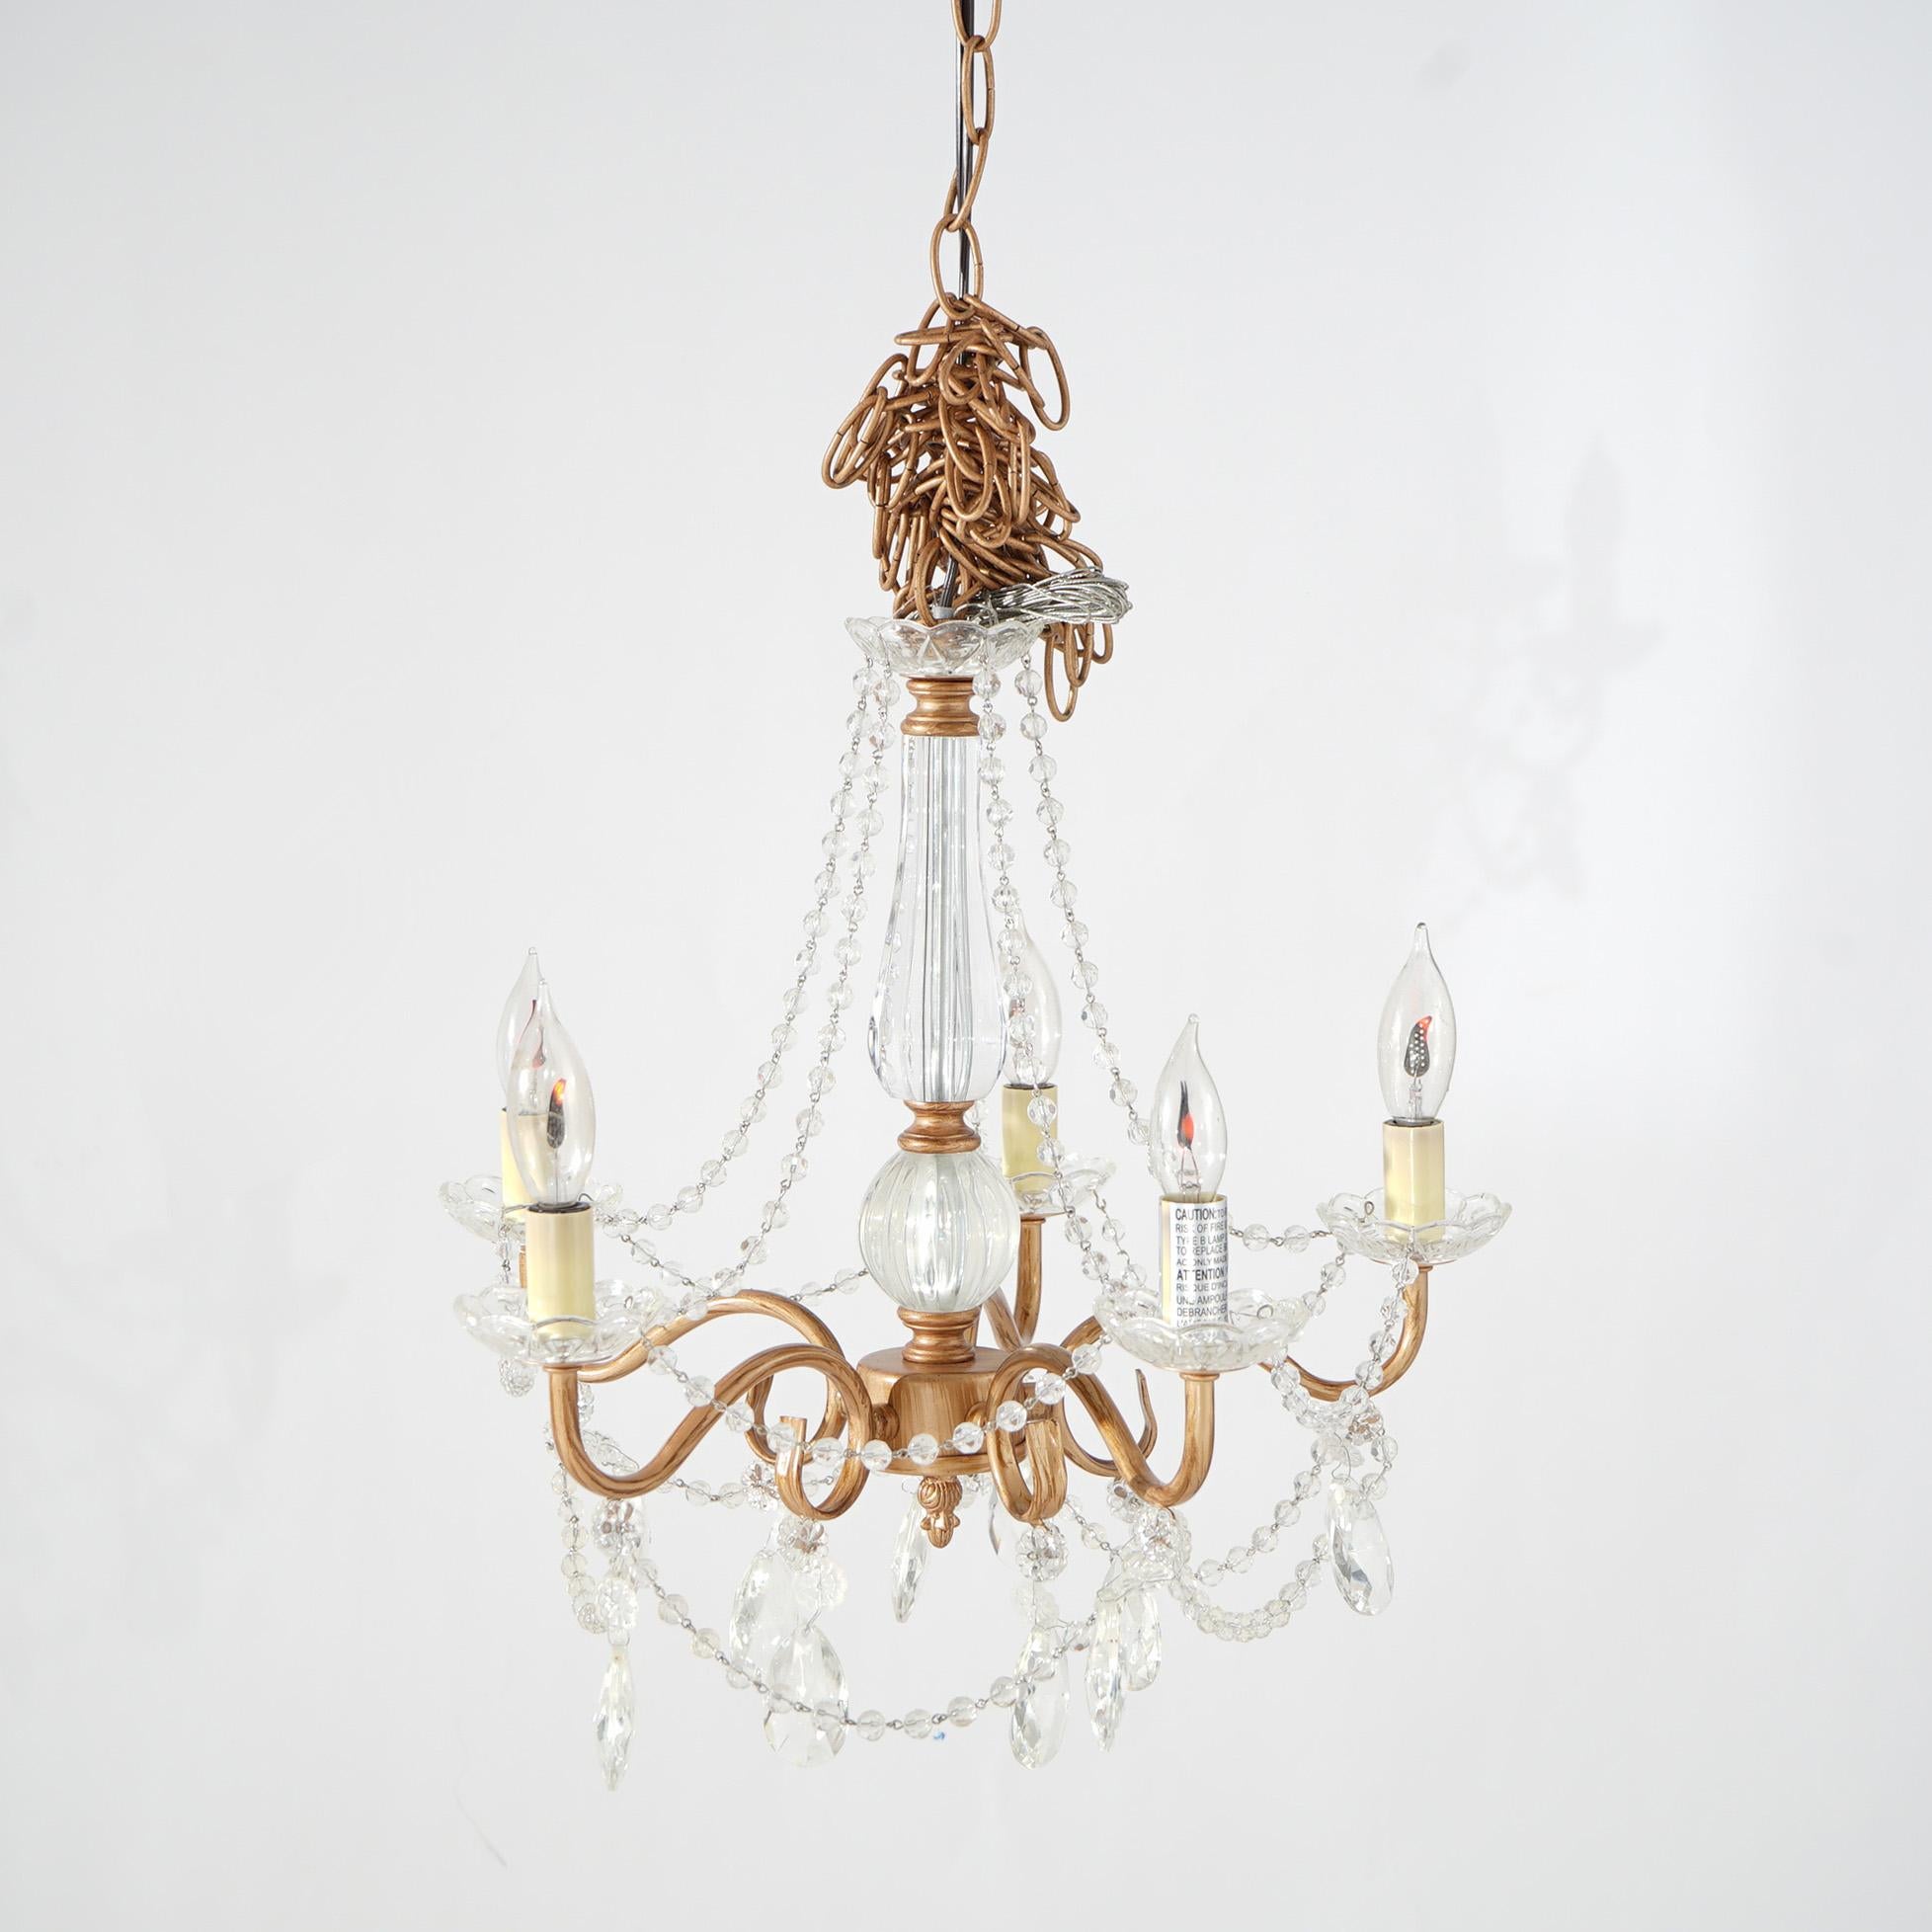 A diminutive chandelier offers brushed copper frame with five scroll form arms terminating in candle lights, hung and strung crystals throughout, 20th century

Measures - 15.5